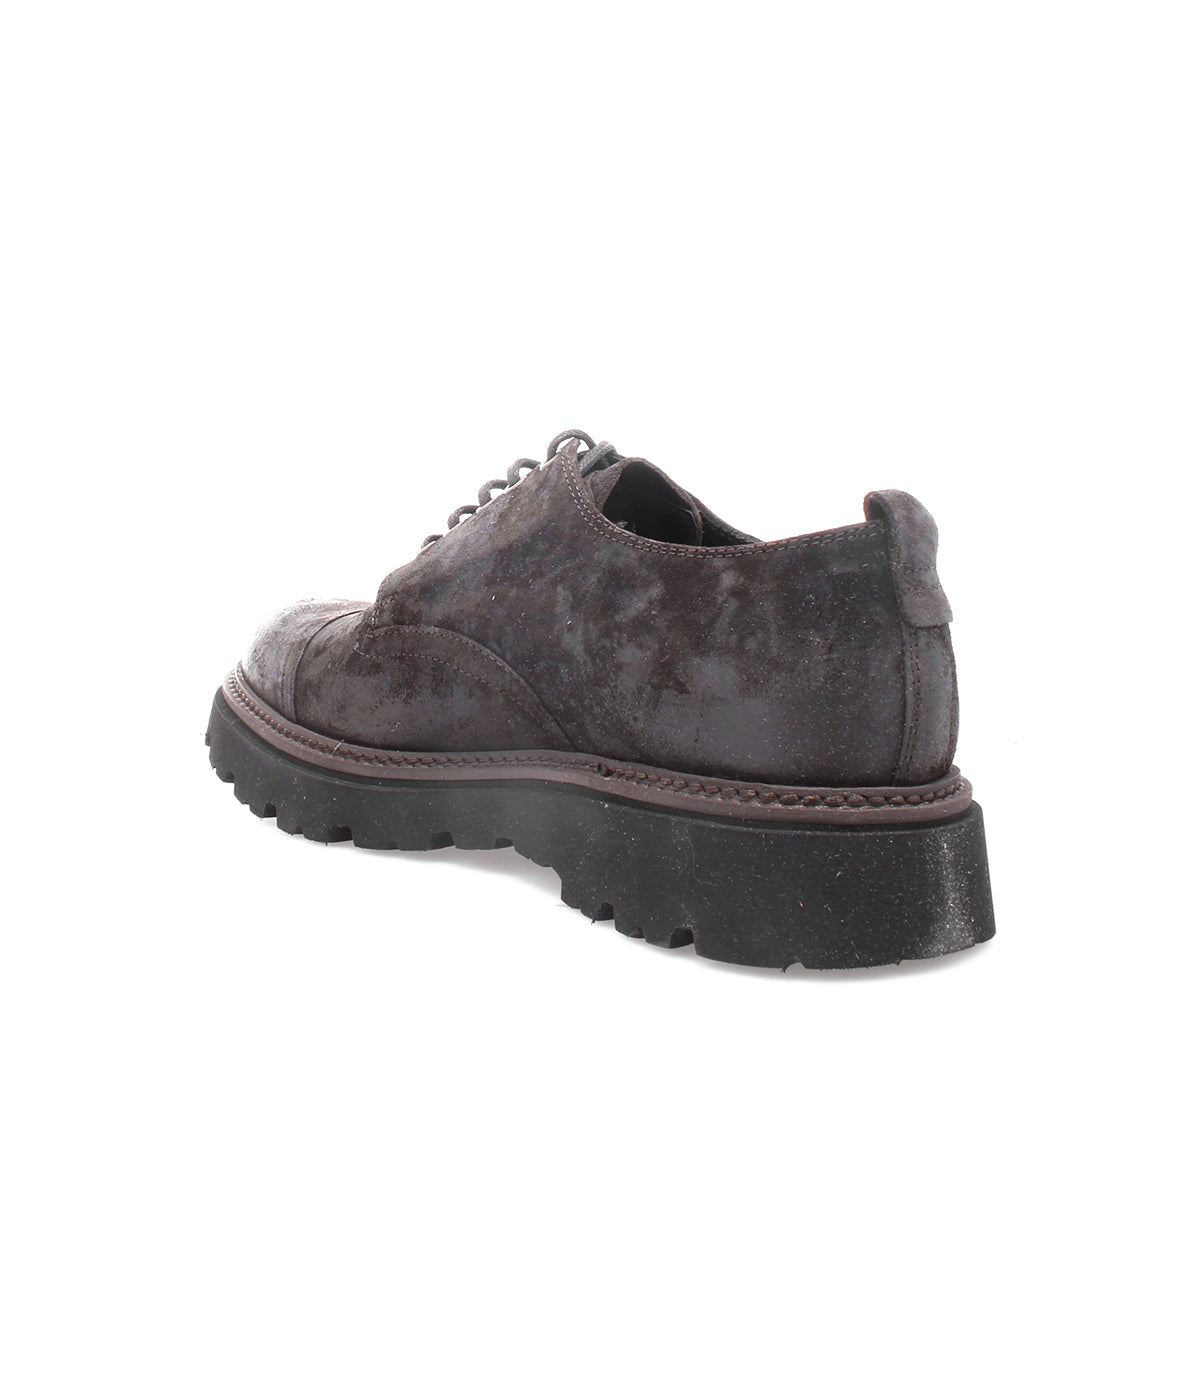 Handcrafted men's brown derby shoe made of Italian leather for durability, with a black sole called Grant by Bed Stu.